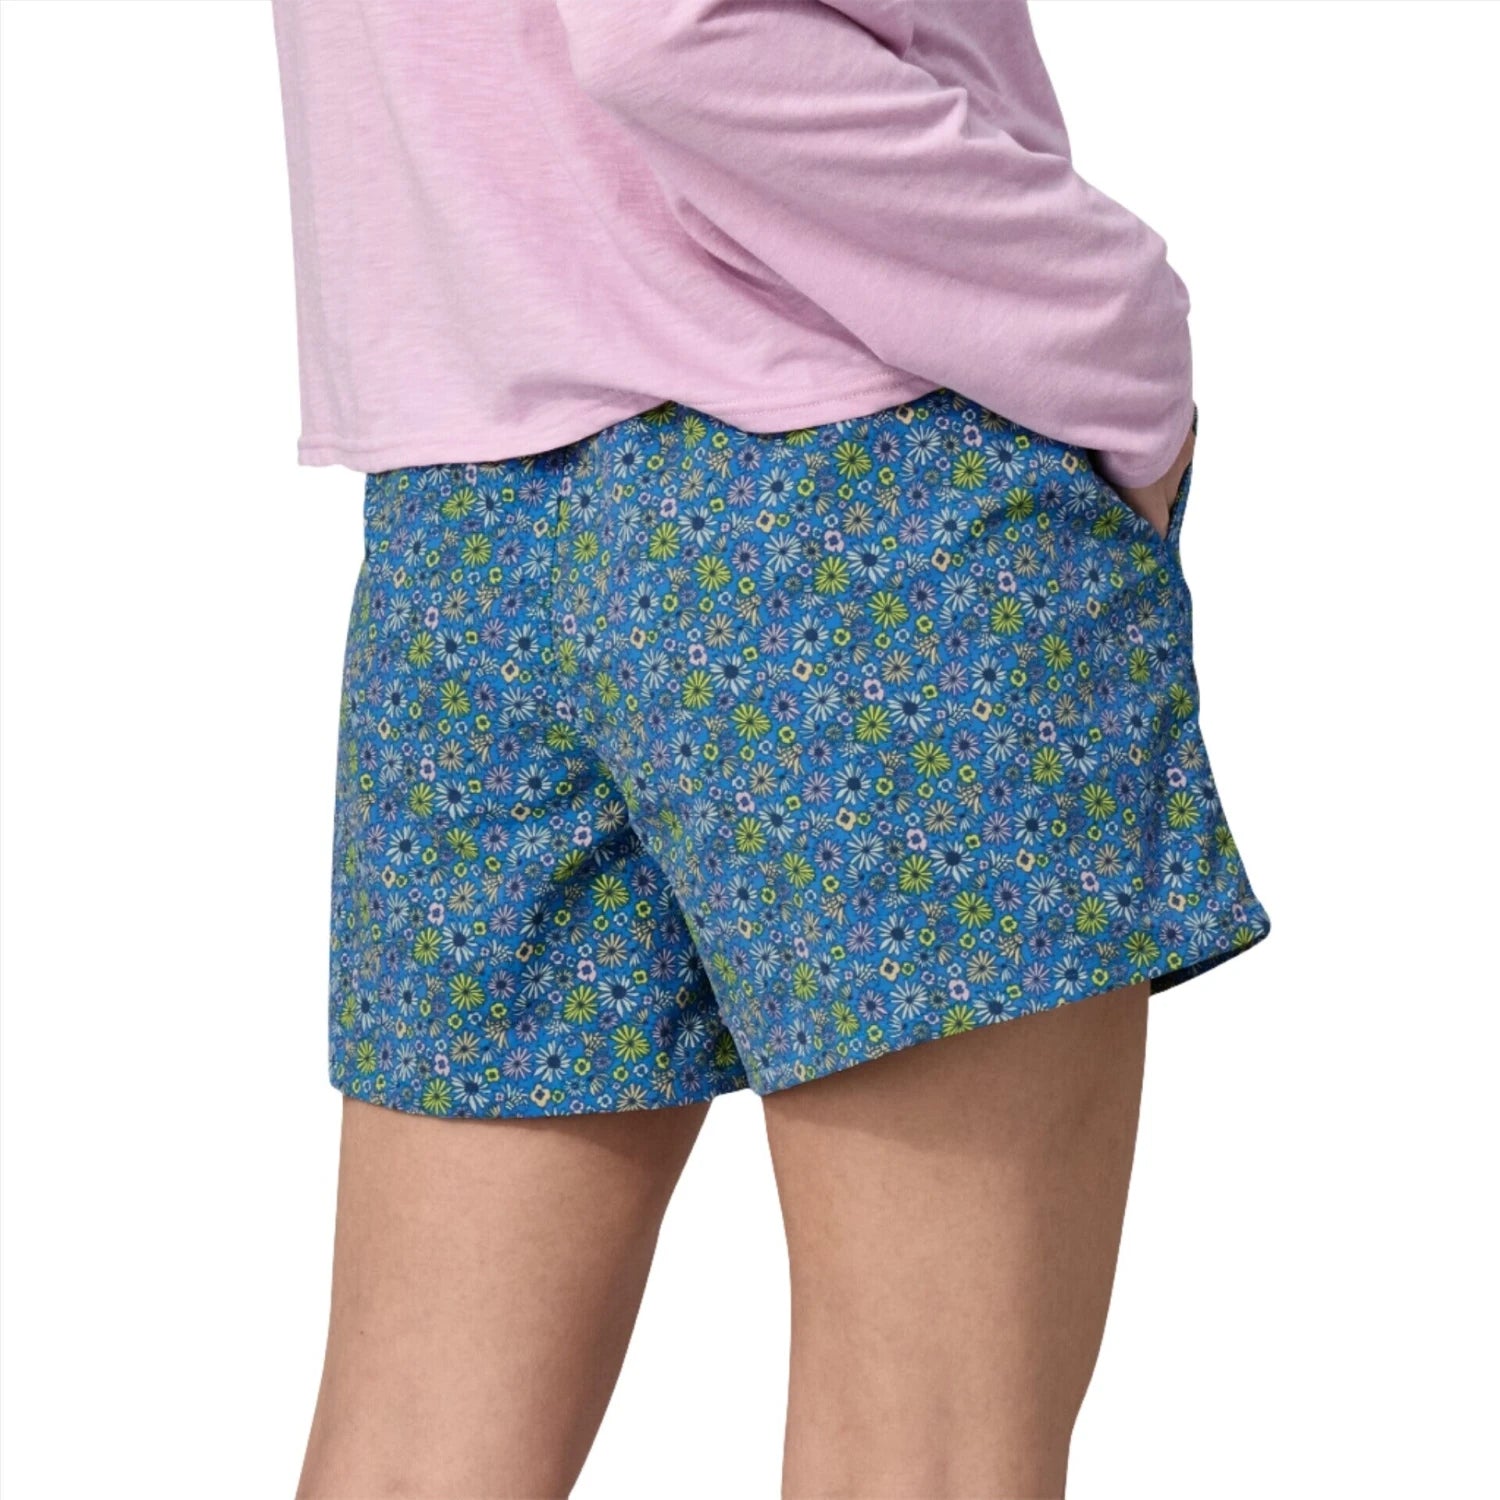 Patagonia W's Baggies™ Shorts - 5", Floral Fun Vessel Blue, back view on model 